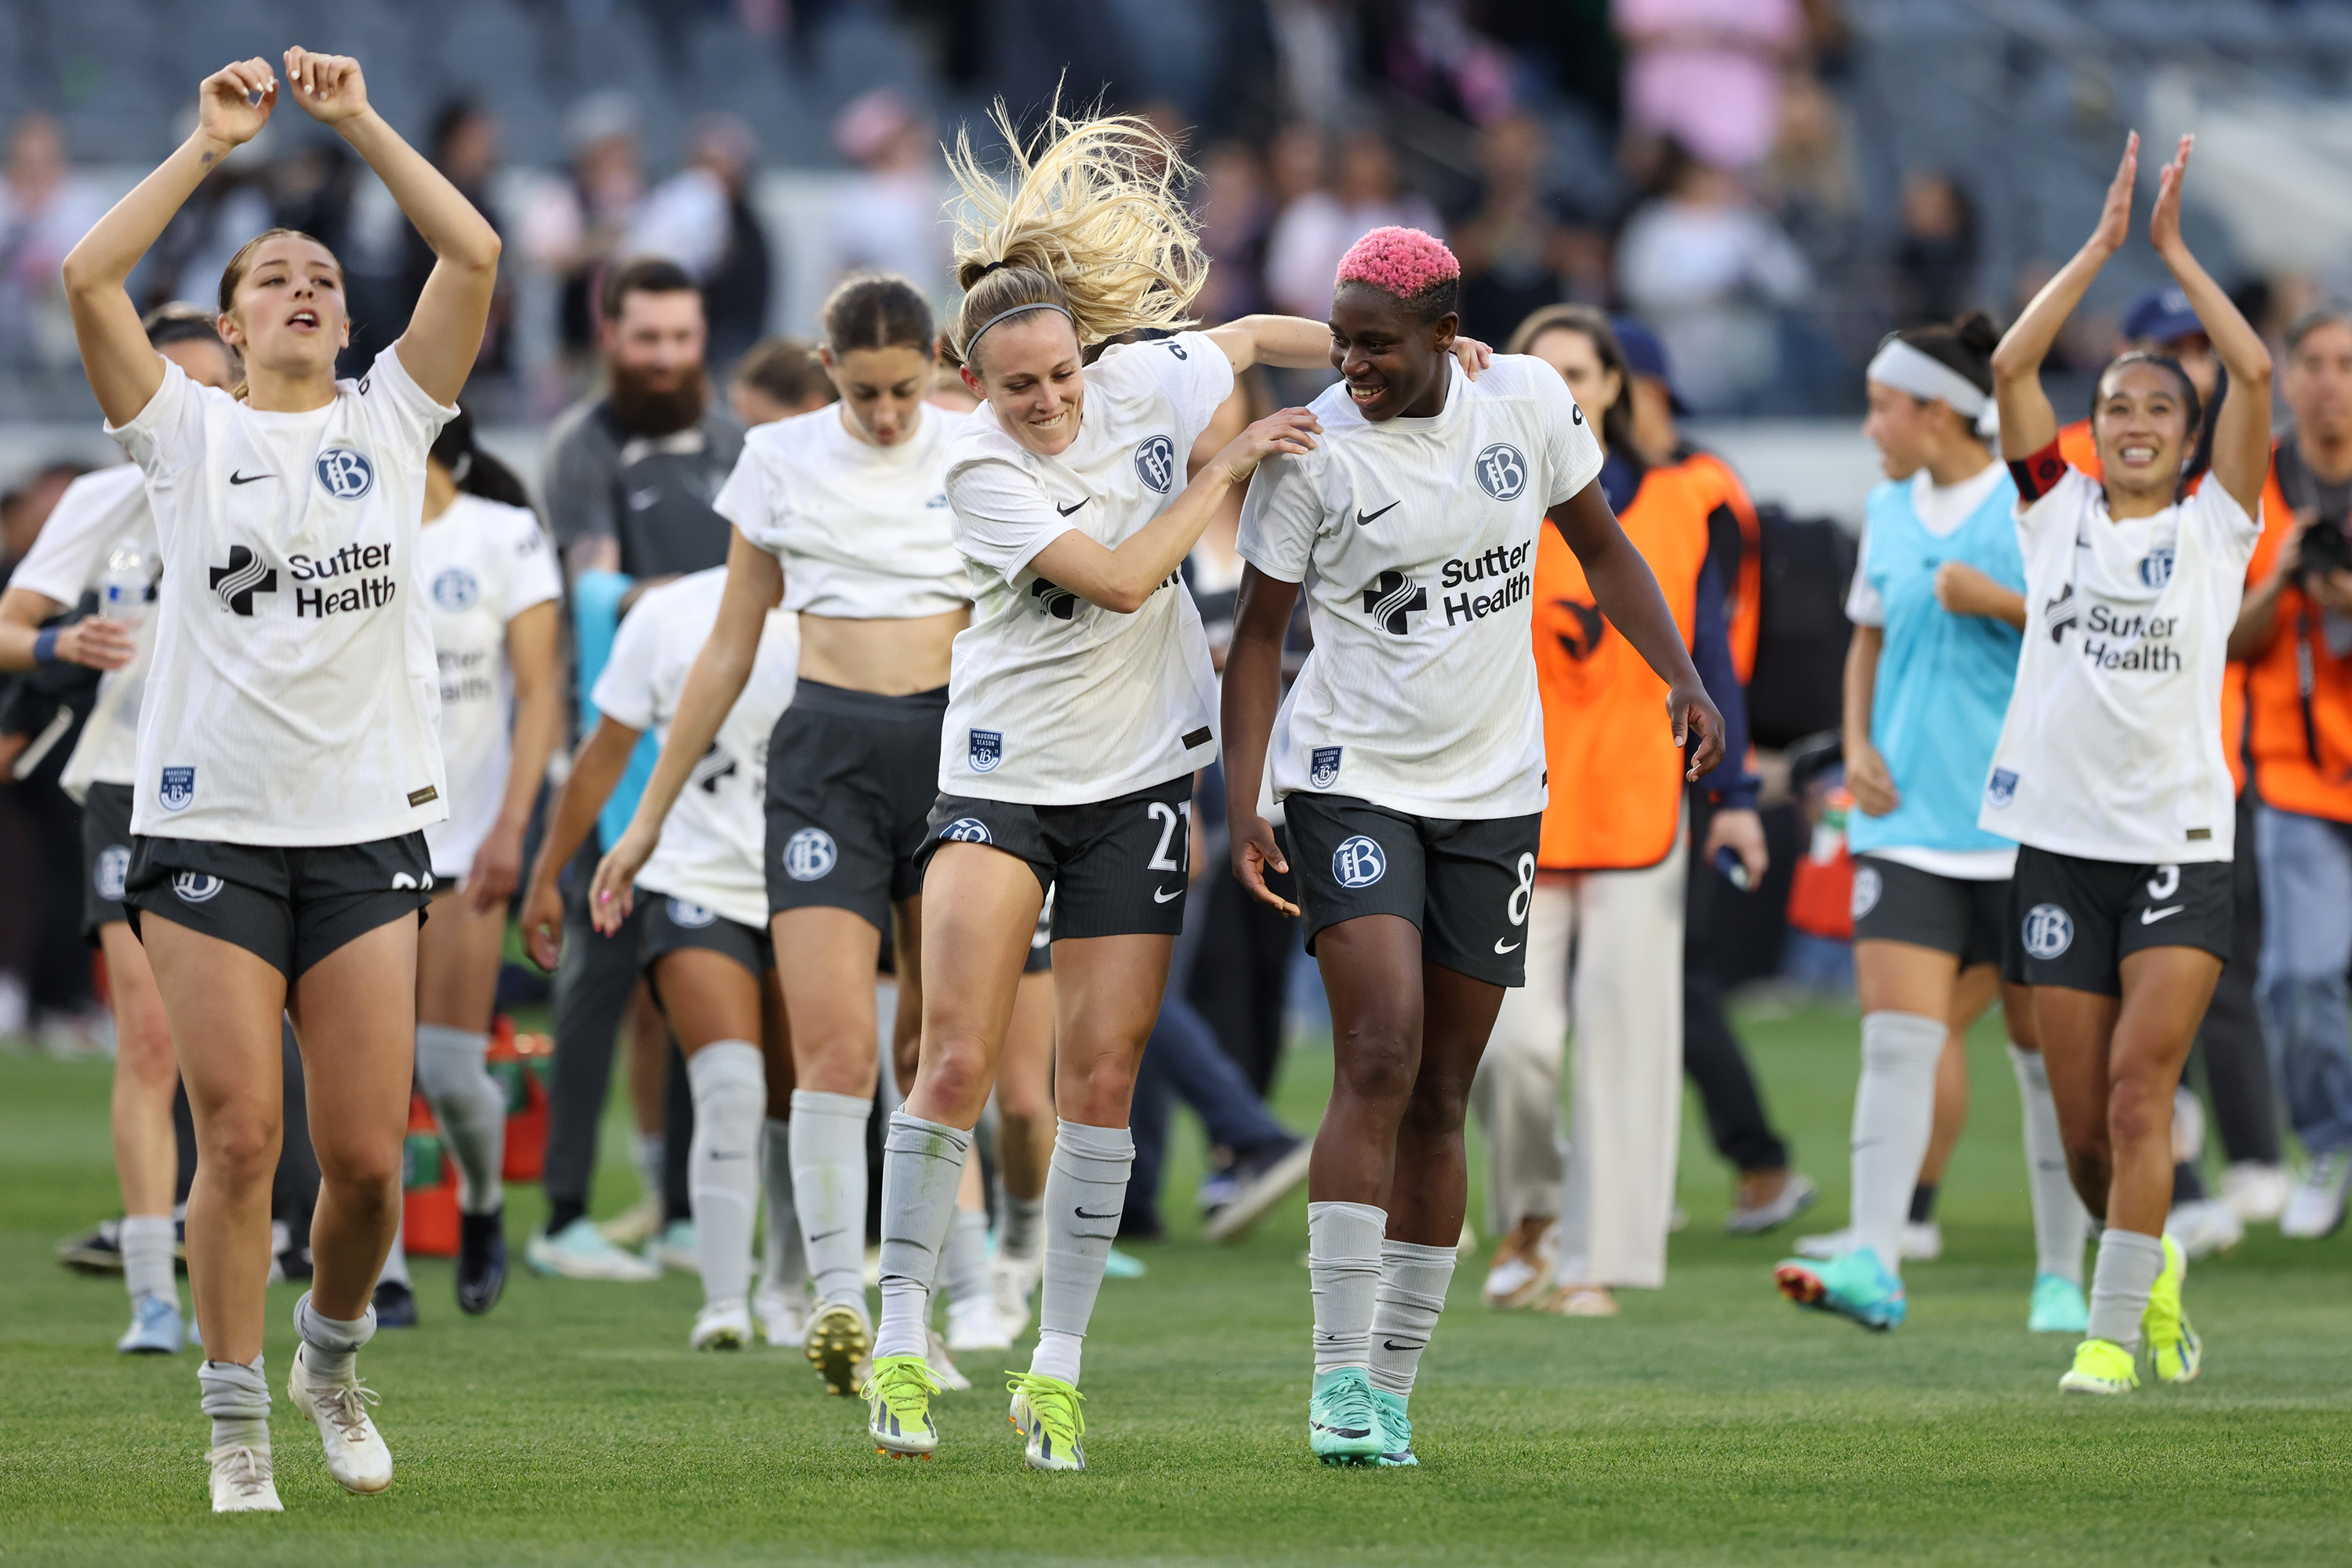 A group of female soccer players in white kits joyfully walk on a field, celebrating with raised arms and smiles.